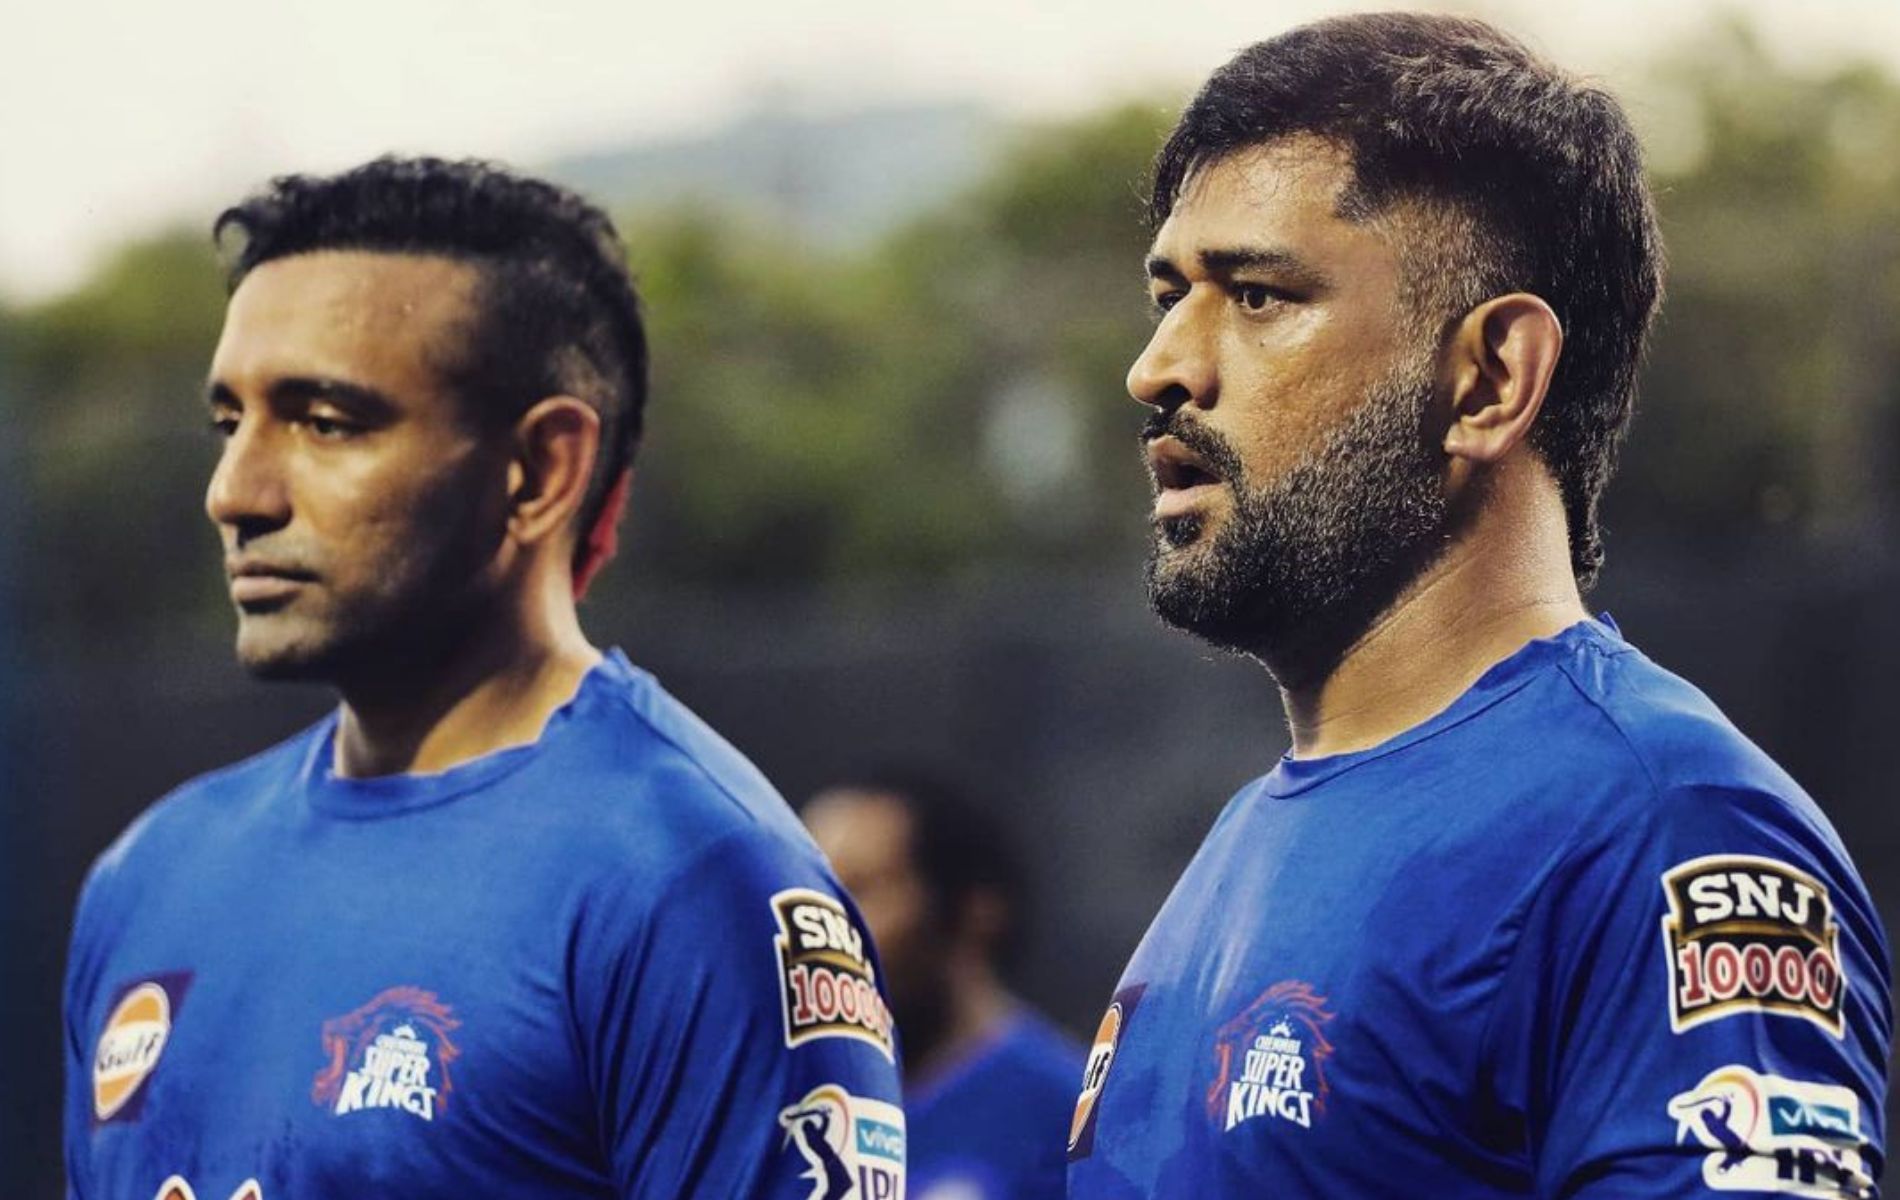 Robin Uthappa (L) with MS Dhoni. (Image: Instagram)